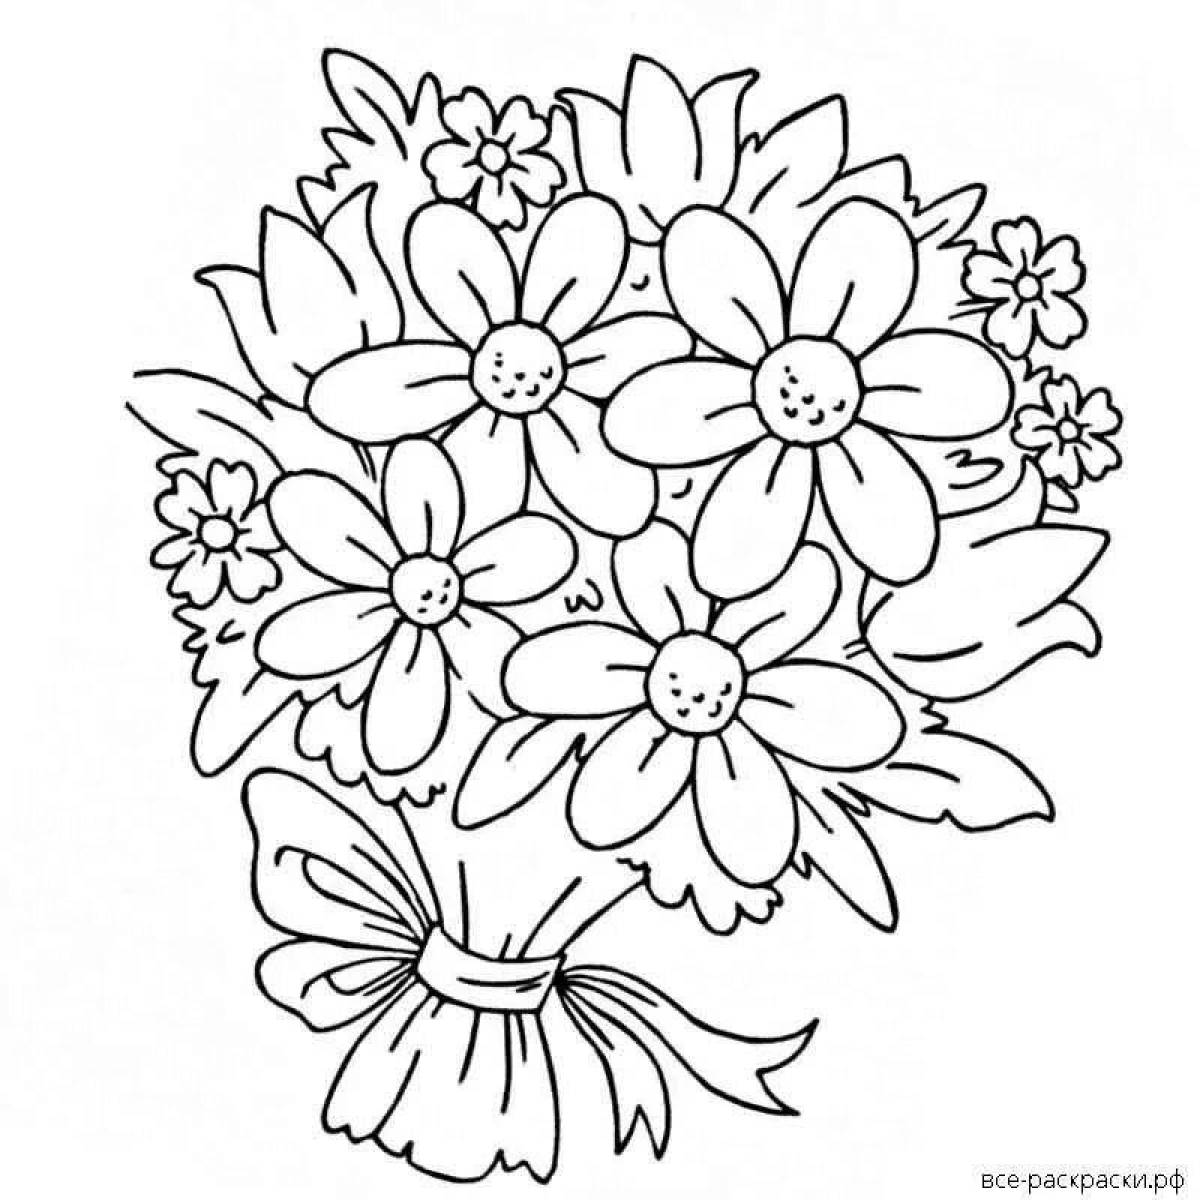 Coloring book spectacular bouquet of daisies